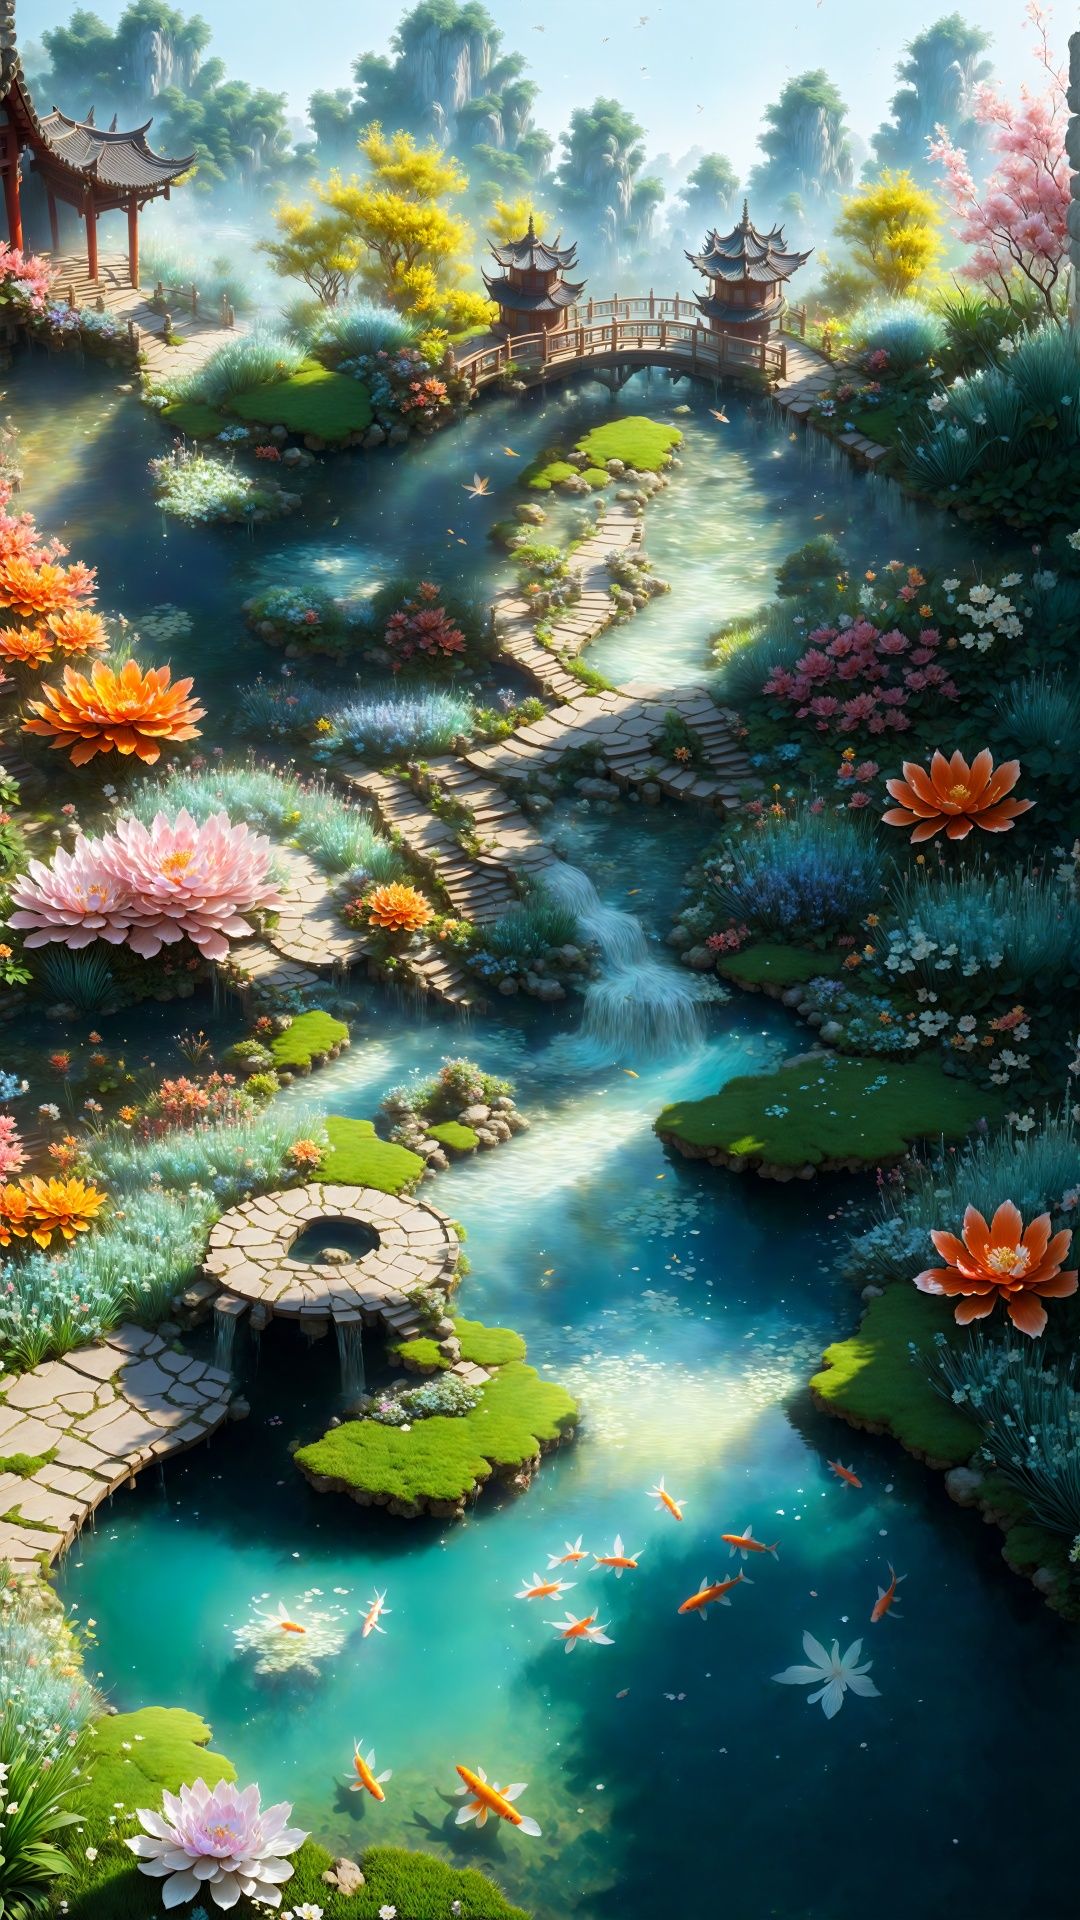 (Oriental fantasy: 1.5) Chinese ancient martial arts style, cosmic perspective (hyper-realistic thick painting style: 1.5) (complex details) The sect's palace is surrounded by a fairy palace garden, in which all kinds of fairy grass and fairy flowers bloom. Colorful. There are small bridges and flowing water in the garden. A stream winds through the garden. There are koi carps swimming in the water. The fragrance of flowers is overflowing. The fairy palace garden seems to come from fairyland.